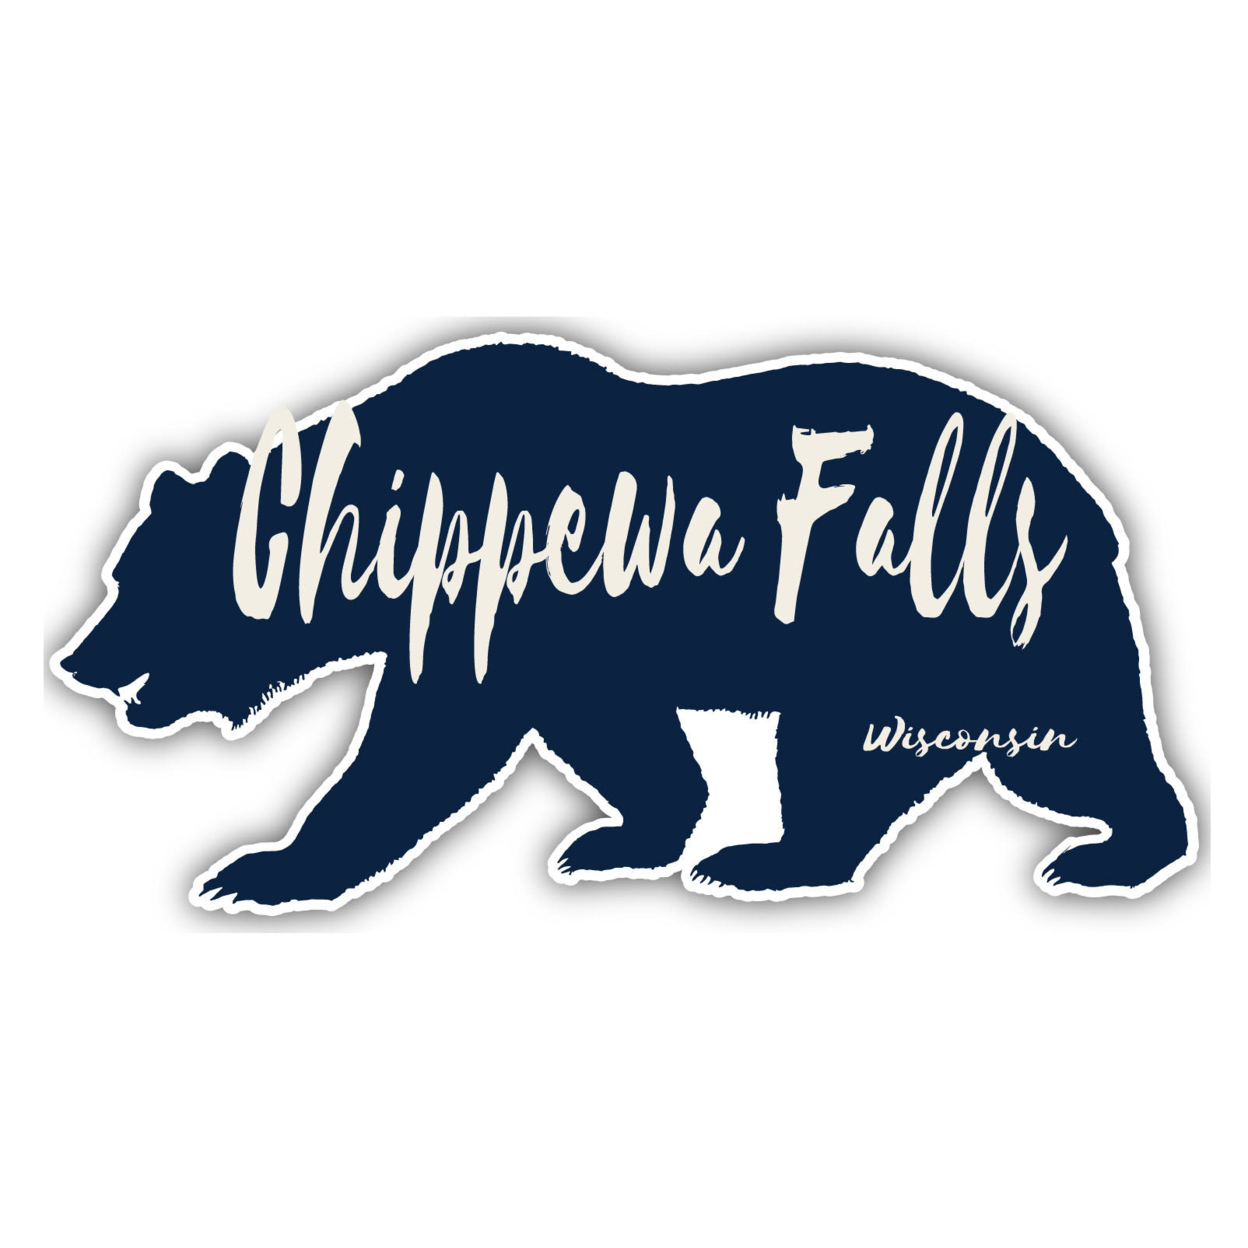 Chippewa Falls Wisconsin Souvenir Decorative Stickers (Choose Theme And Size) - 4-Pack, 4-Inch, Bear